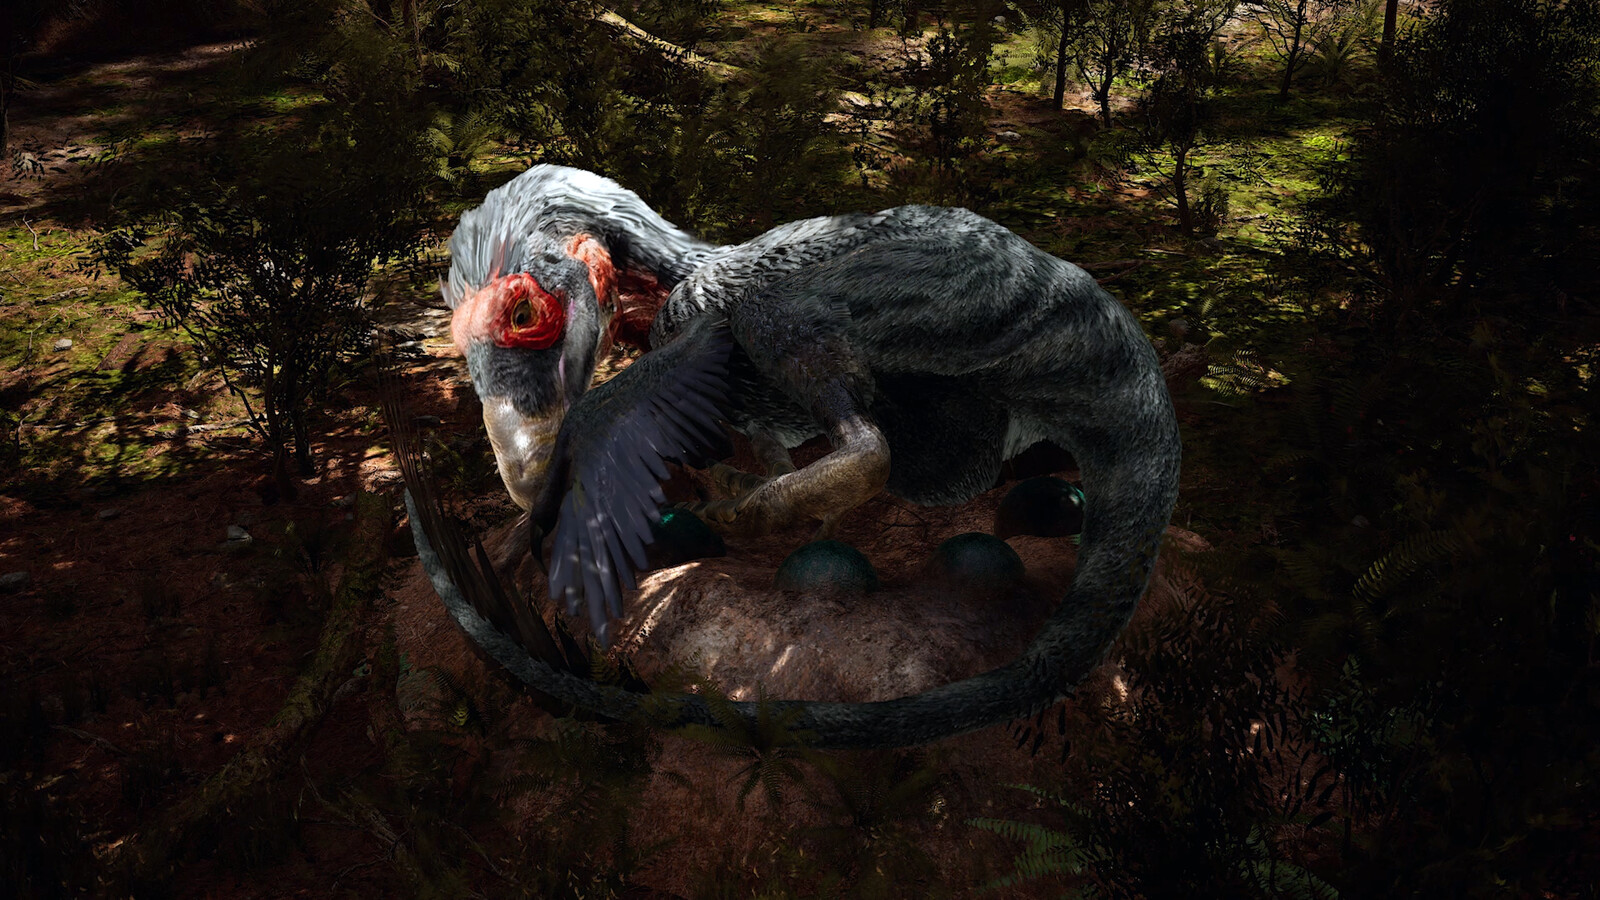 Deinonychus cleaning its feathers. The classic Tenontosaurus n.1 enemy, but not this time... The famous "sleeping" Mei long specimens are the main inspiration for this scene.